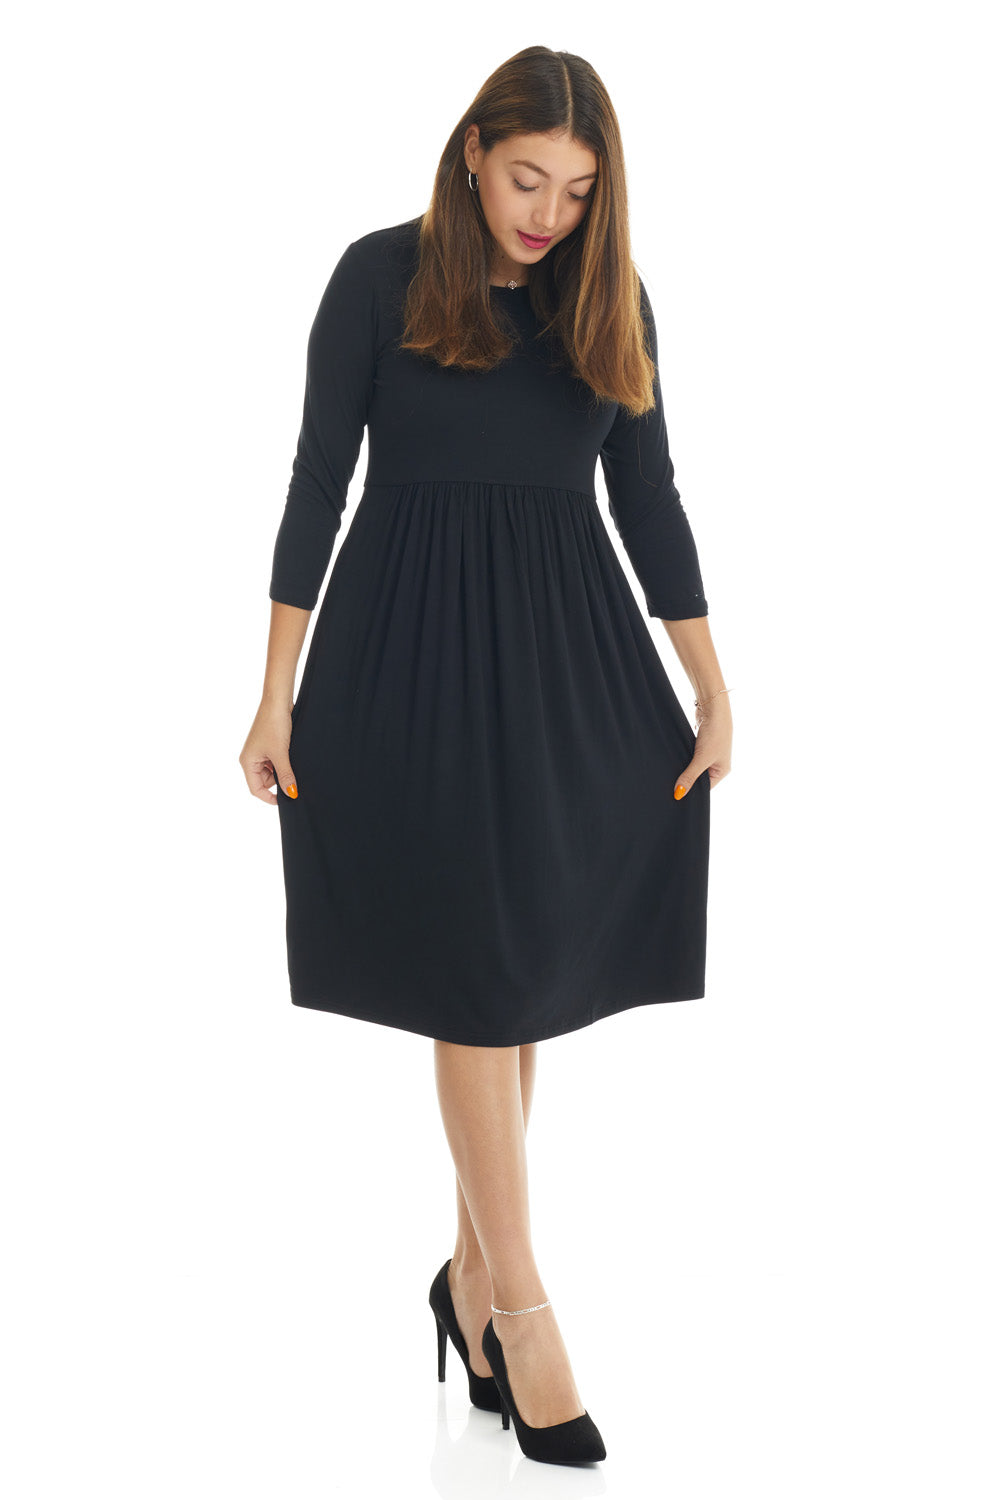 modest 3/4 sleeve babydoll, black swing dress with pockets